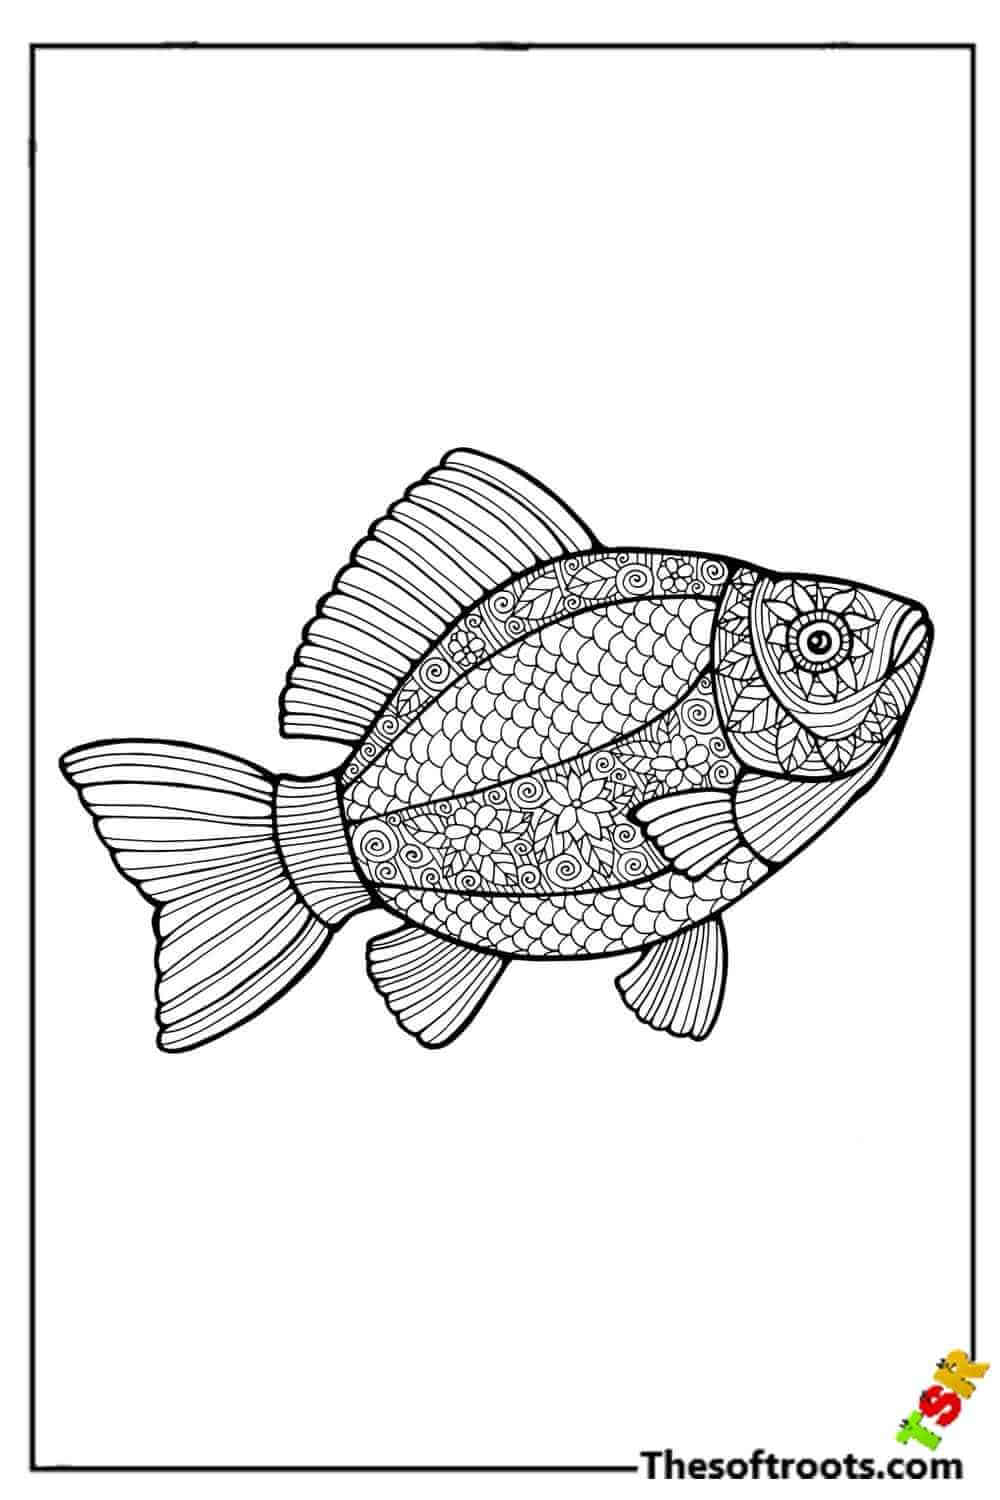 Adult Fish Coloring pages